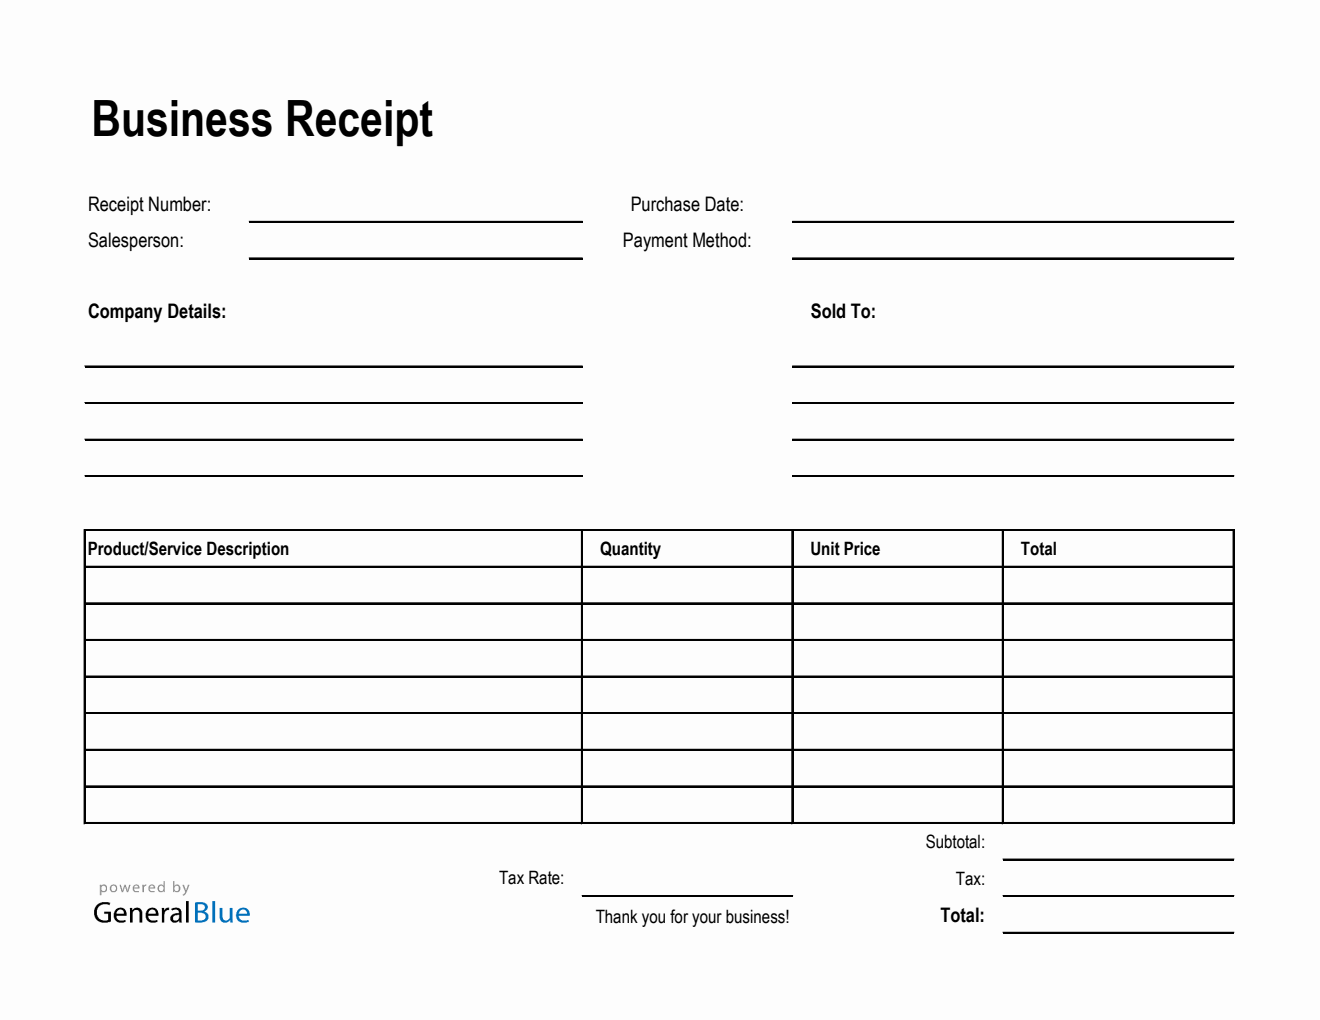 Printable Business Receipt Template in Excel